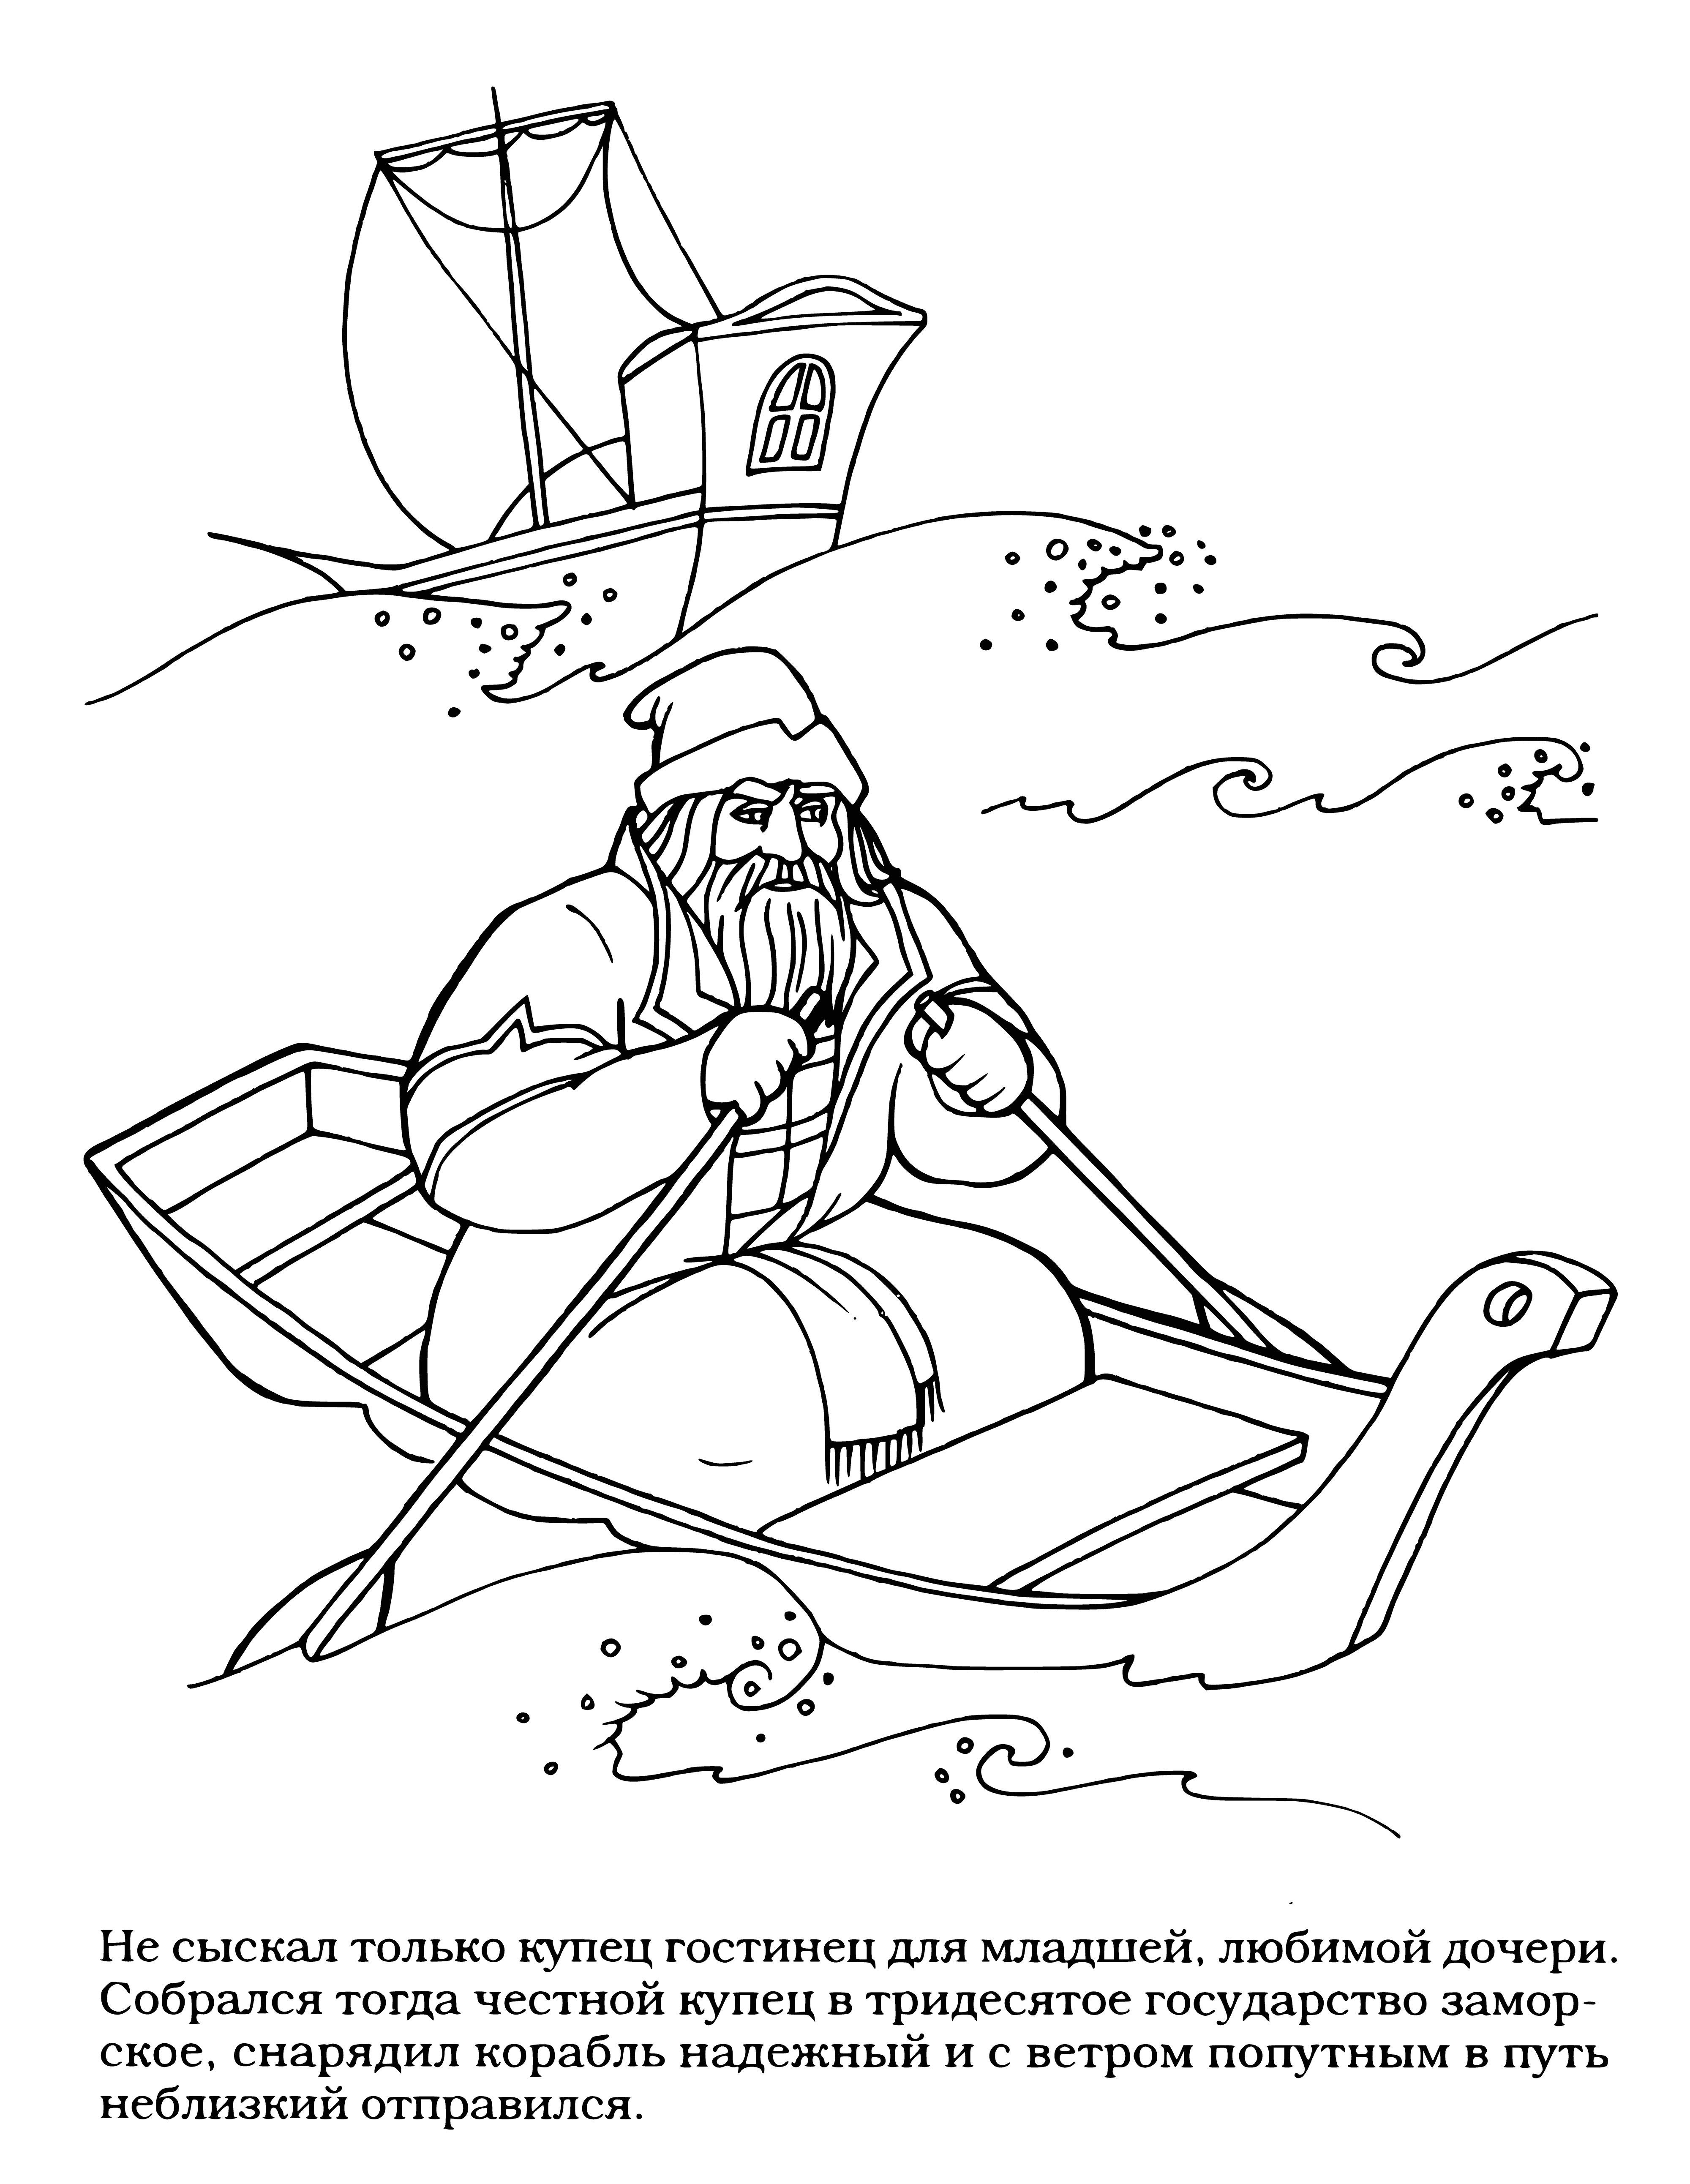 coloring page: Merchant in boat in lake w/ beard, purple robe, scarf, hat, basket - selling goods to help his family.